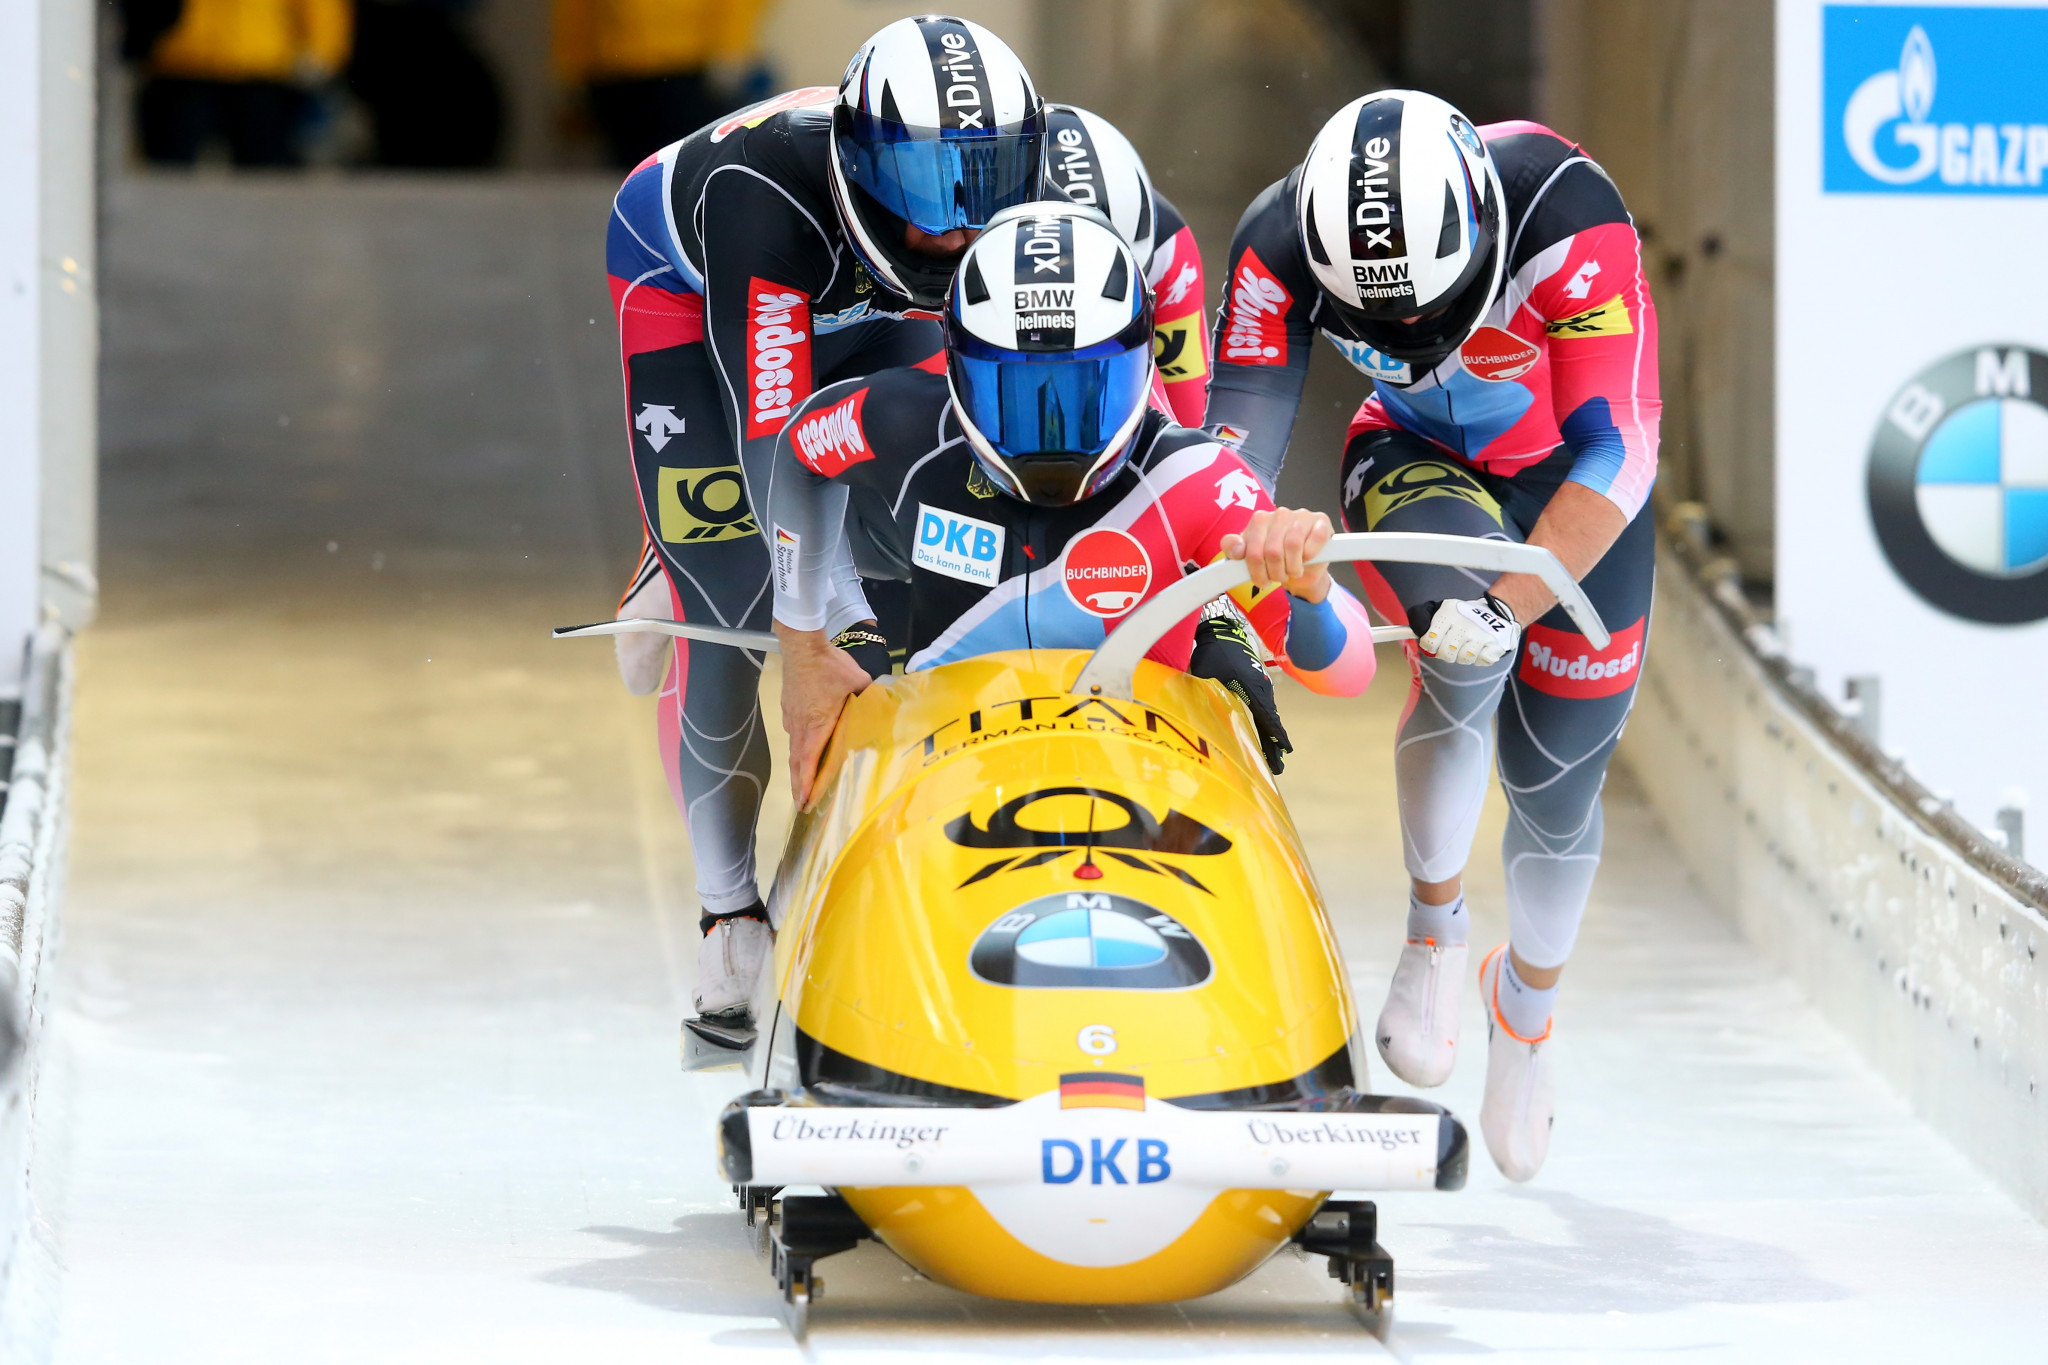 Germany claim third European gold with four-man bobsleigh victory at IBSF World Cup in Königssee